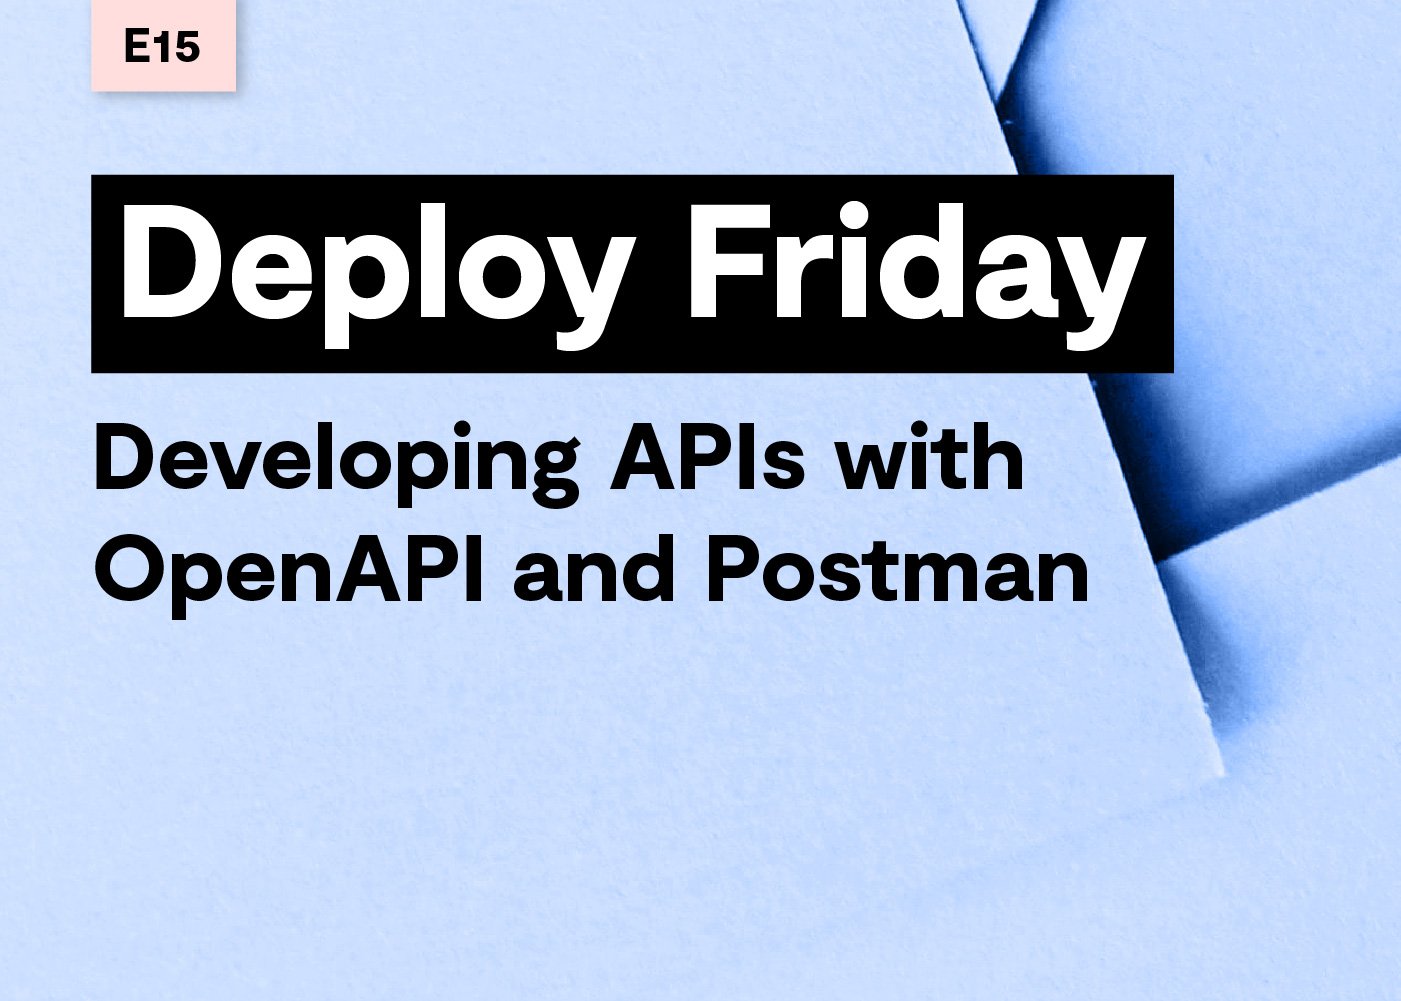 Developing APIs with OpenAPI and Postman